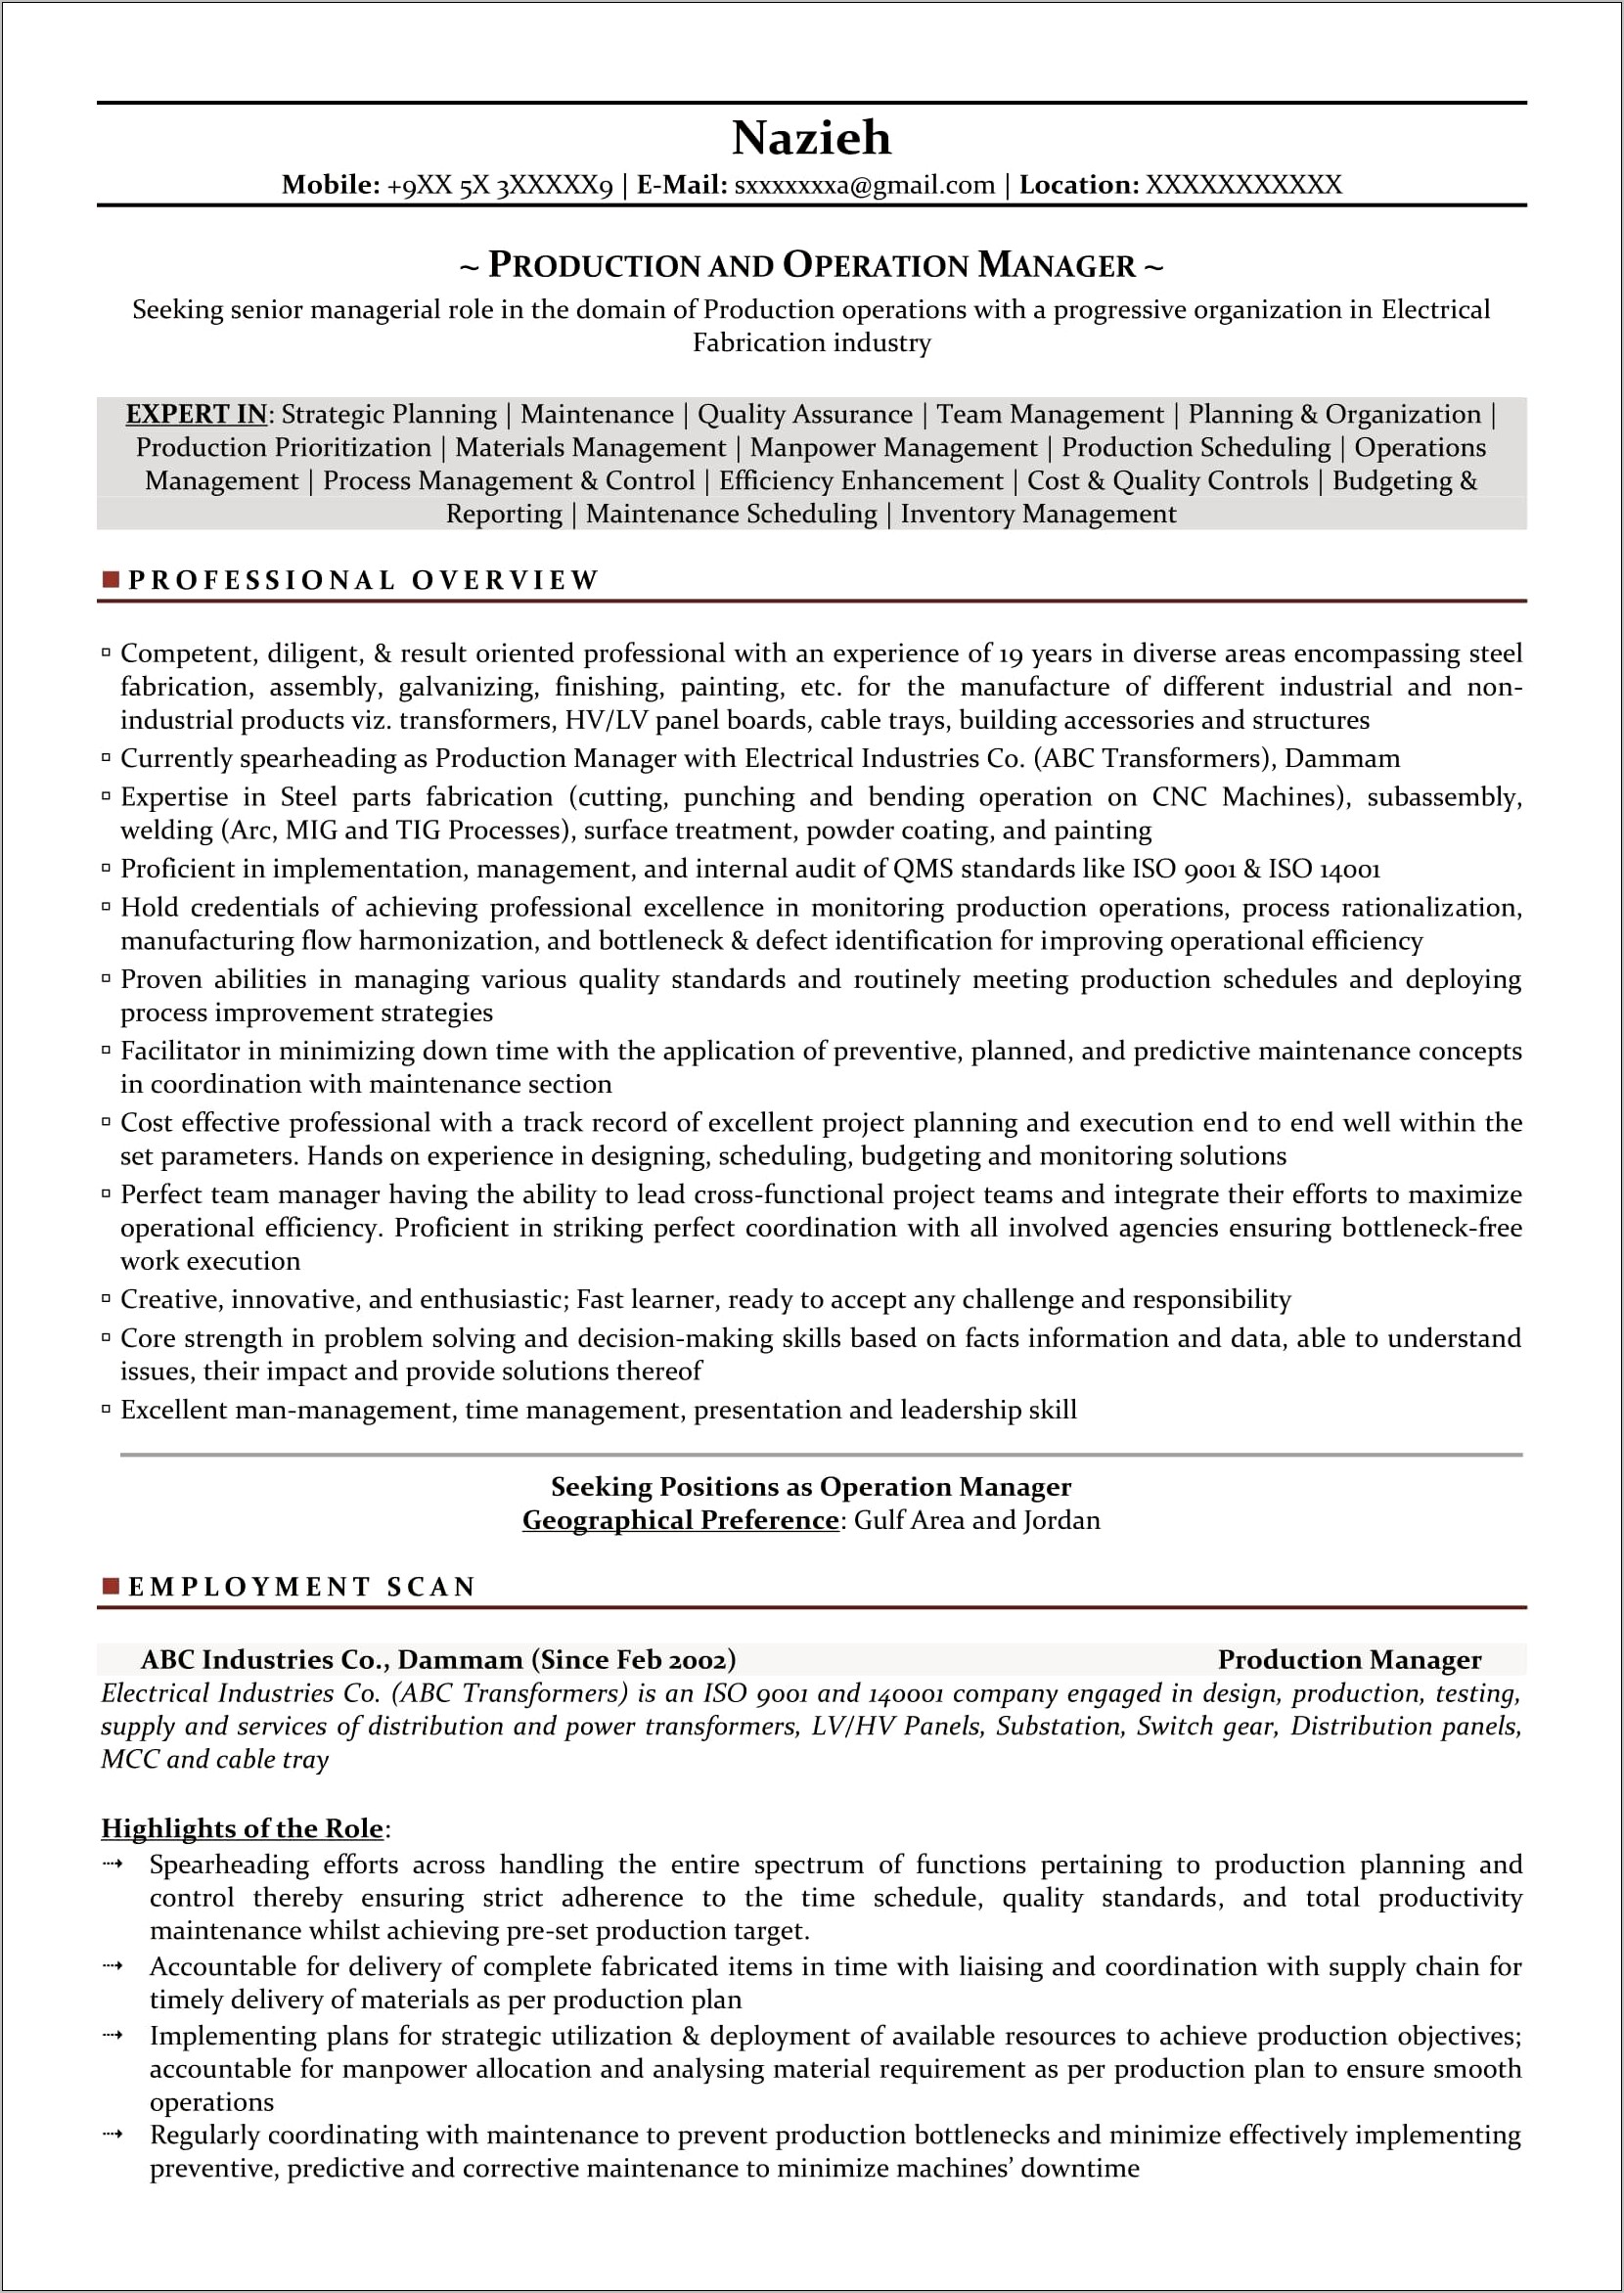 Purchase Manager Resume Sample India